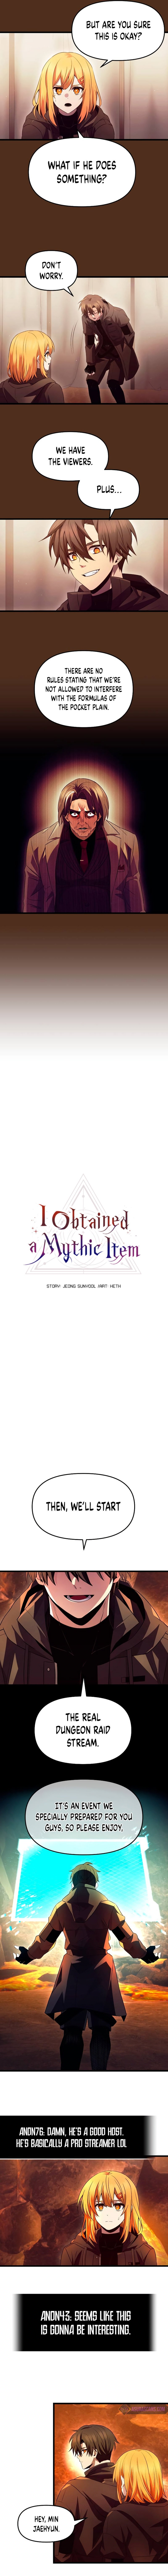 i-obtained-a-mythic-item-chap-72-2